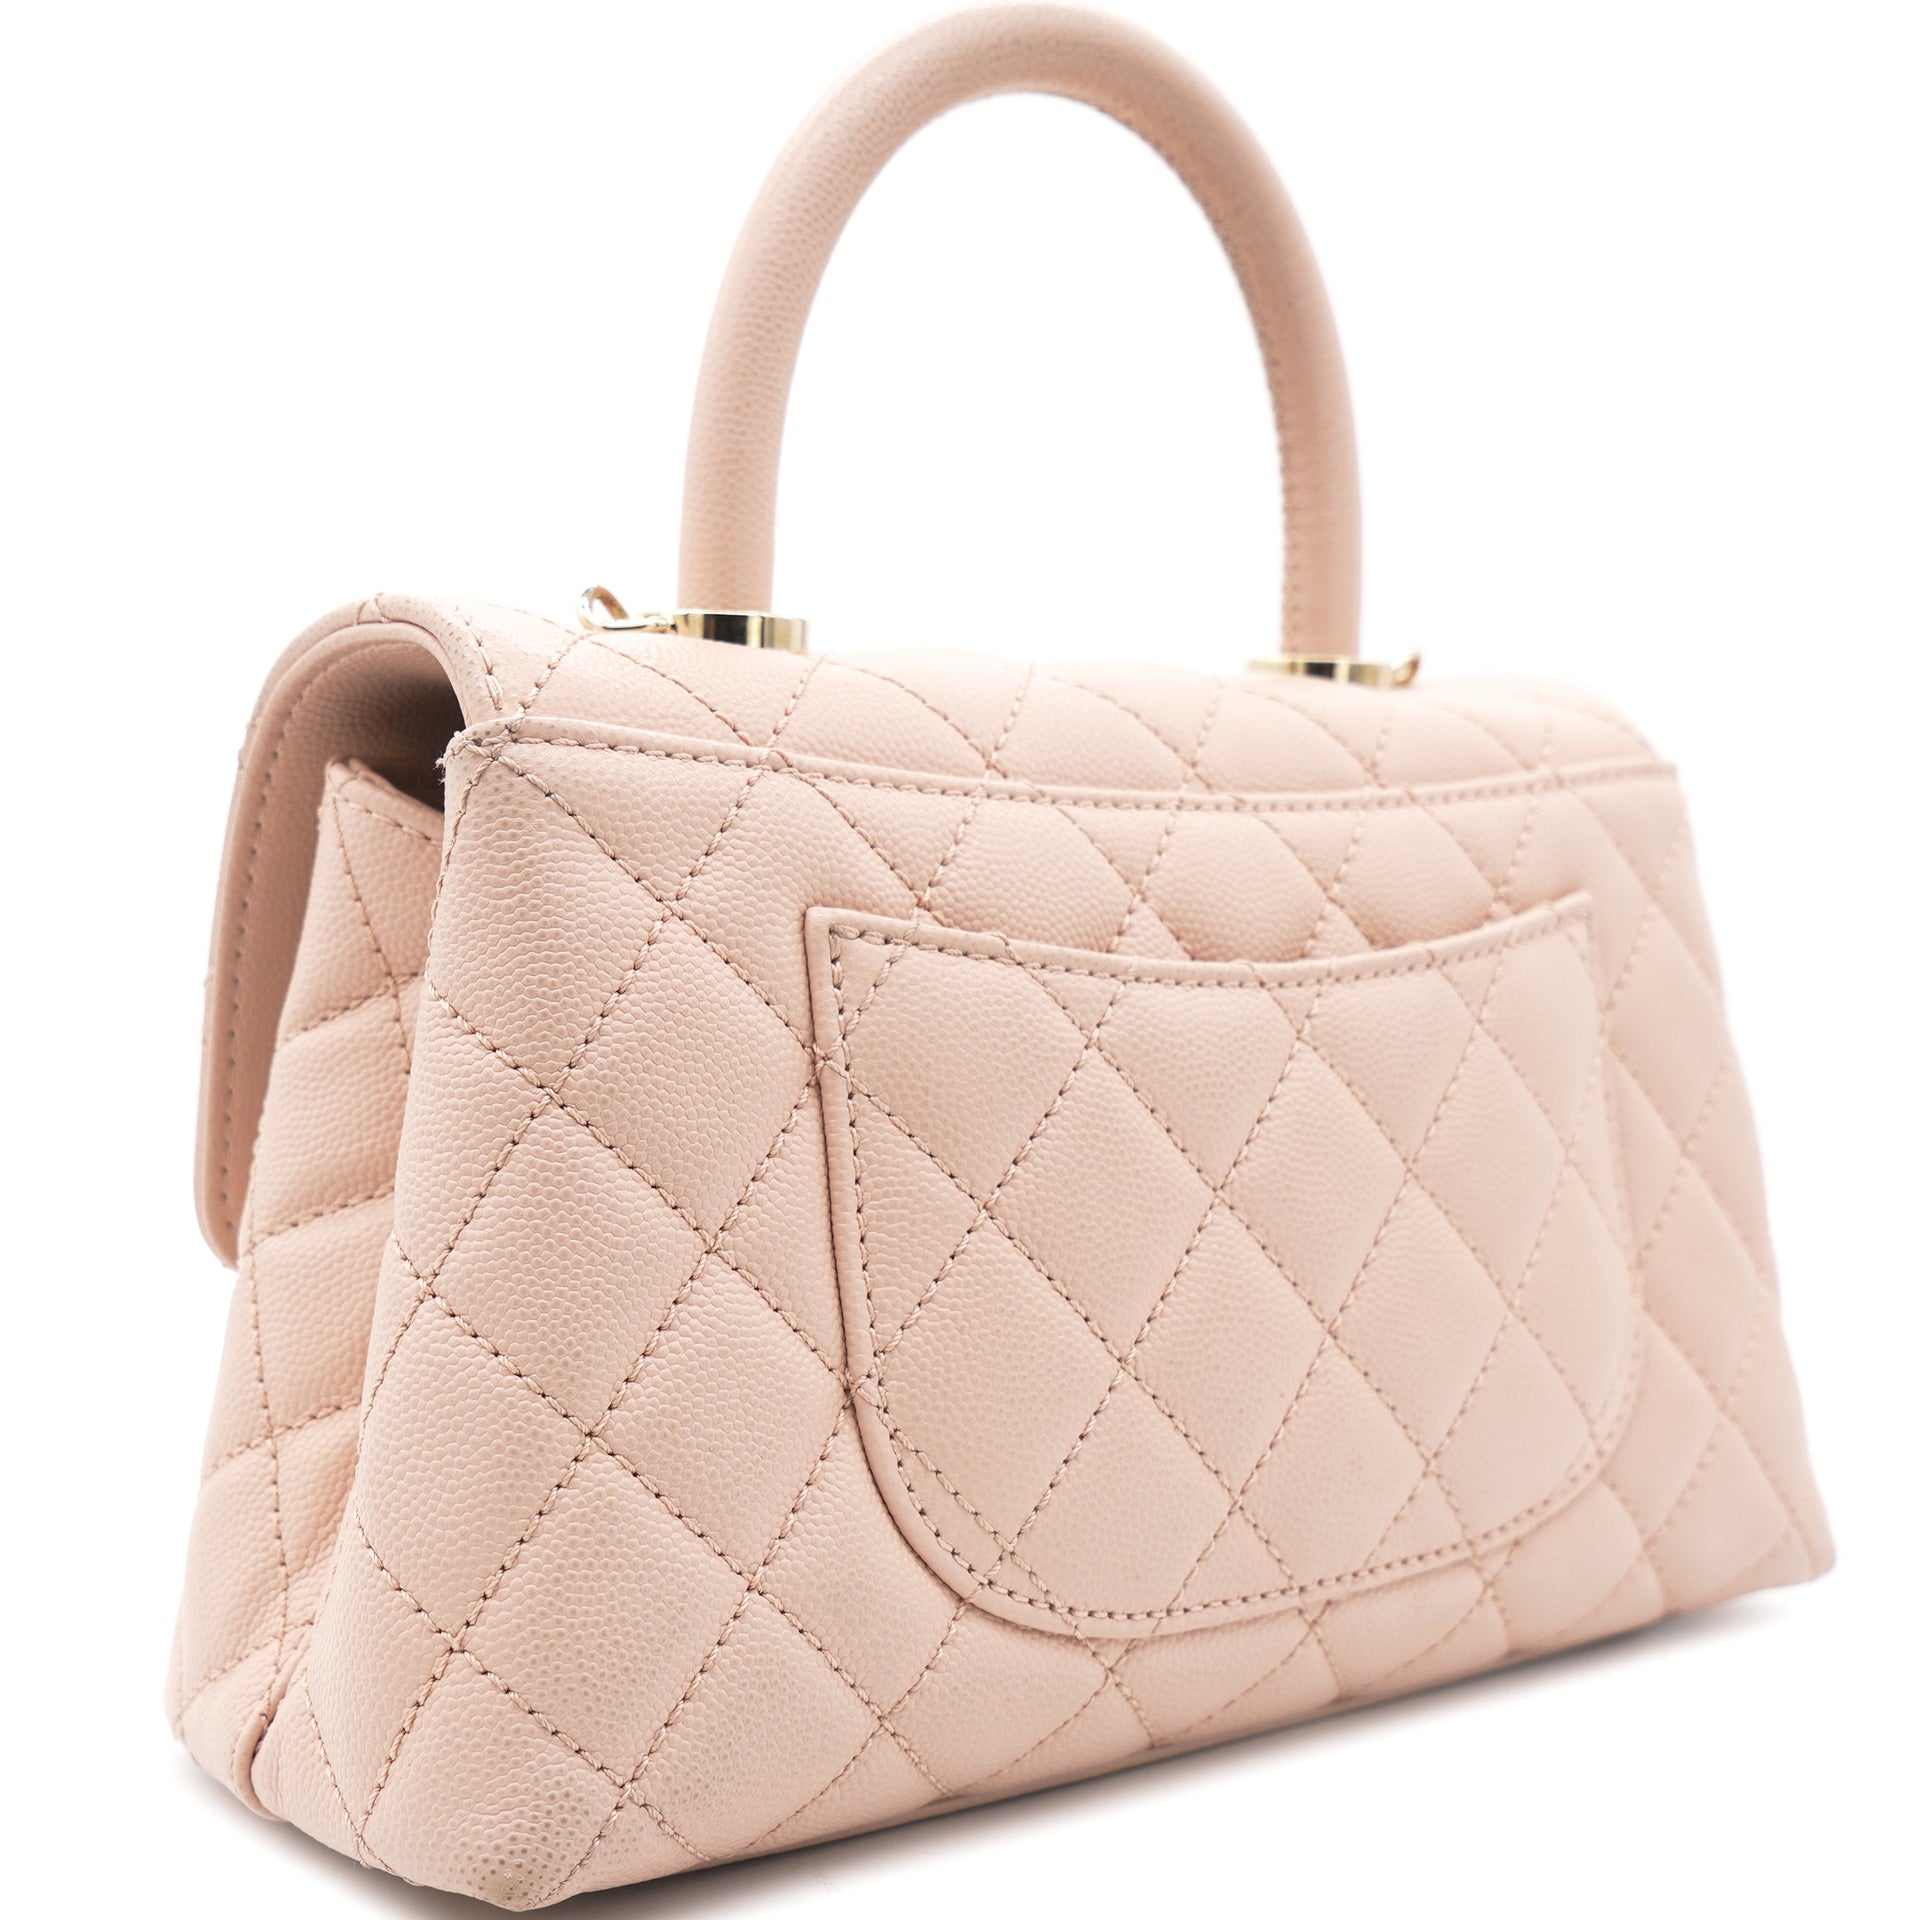 Sold at Auction: Chanel Beige Quilted Caviar Jumbo Easy Flap Bag